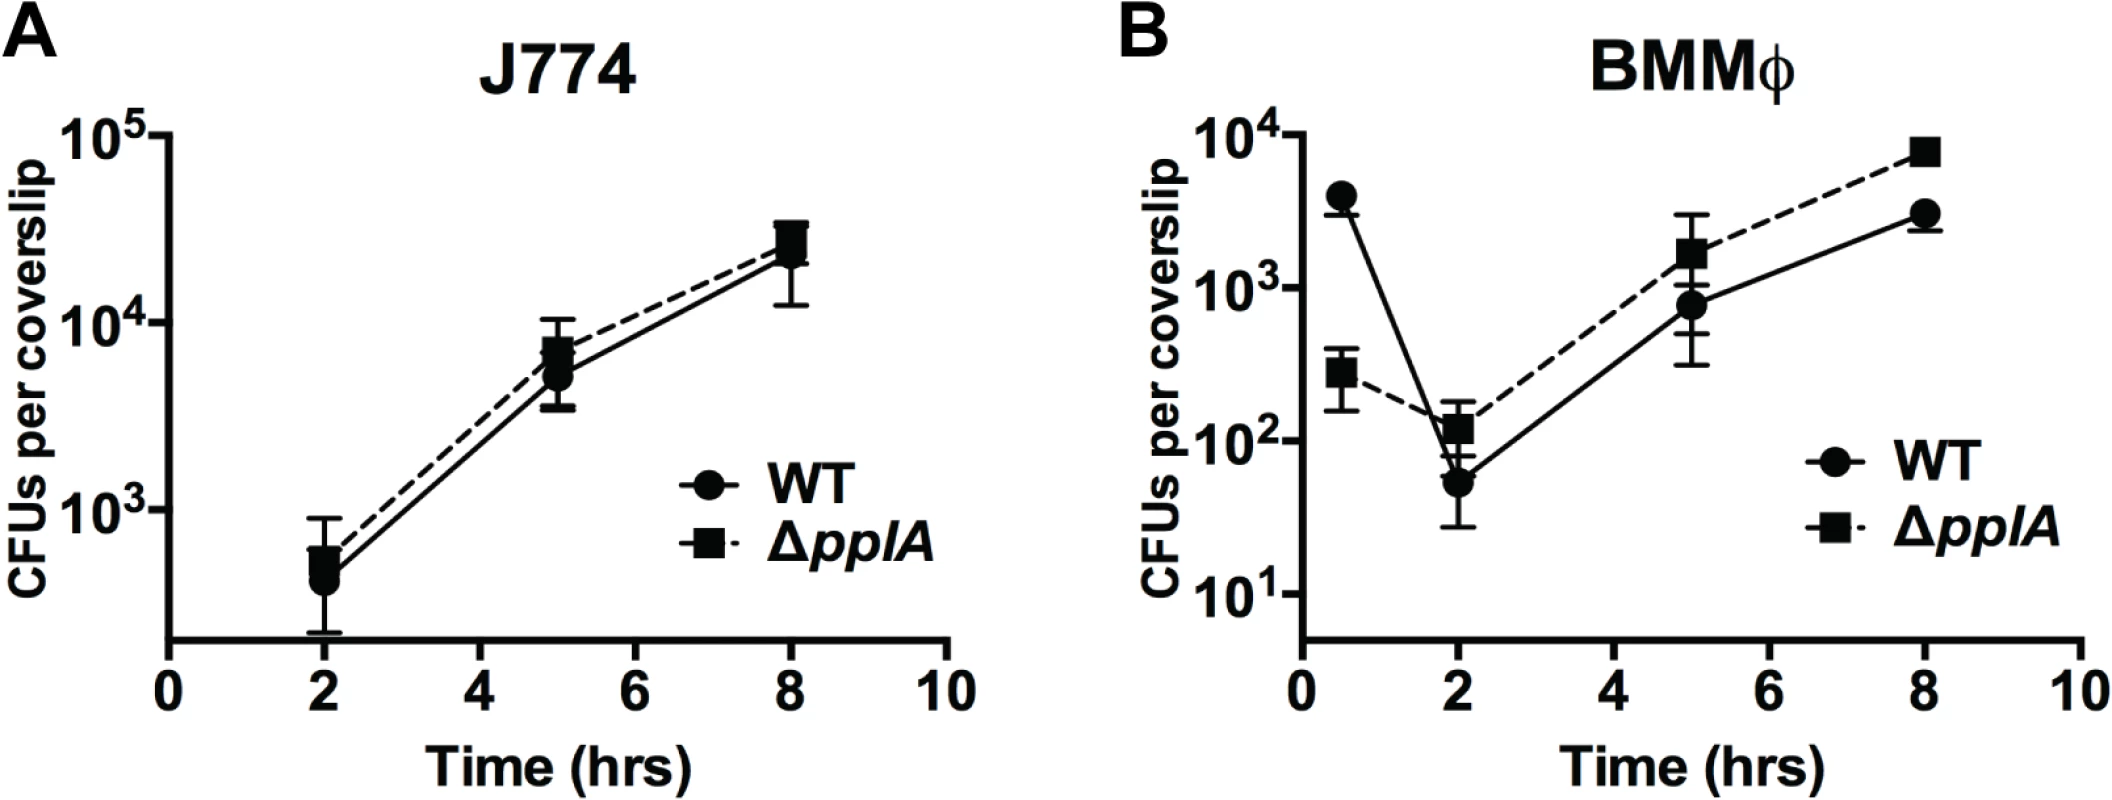 Loss of <i>pplA</i> pheromone does not delay intracellular growth or vacuolar escape in professional phagocytic cells.